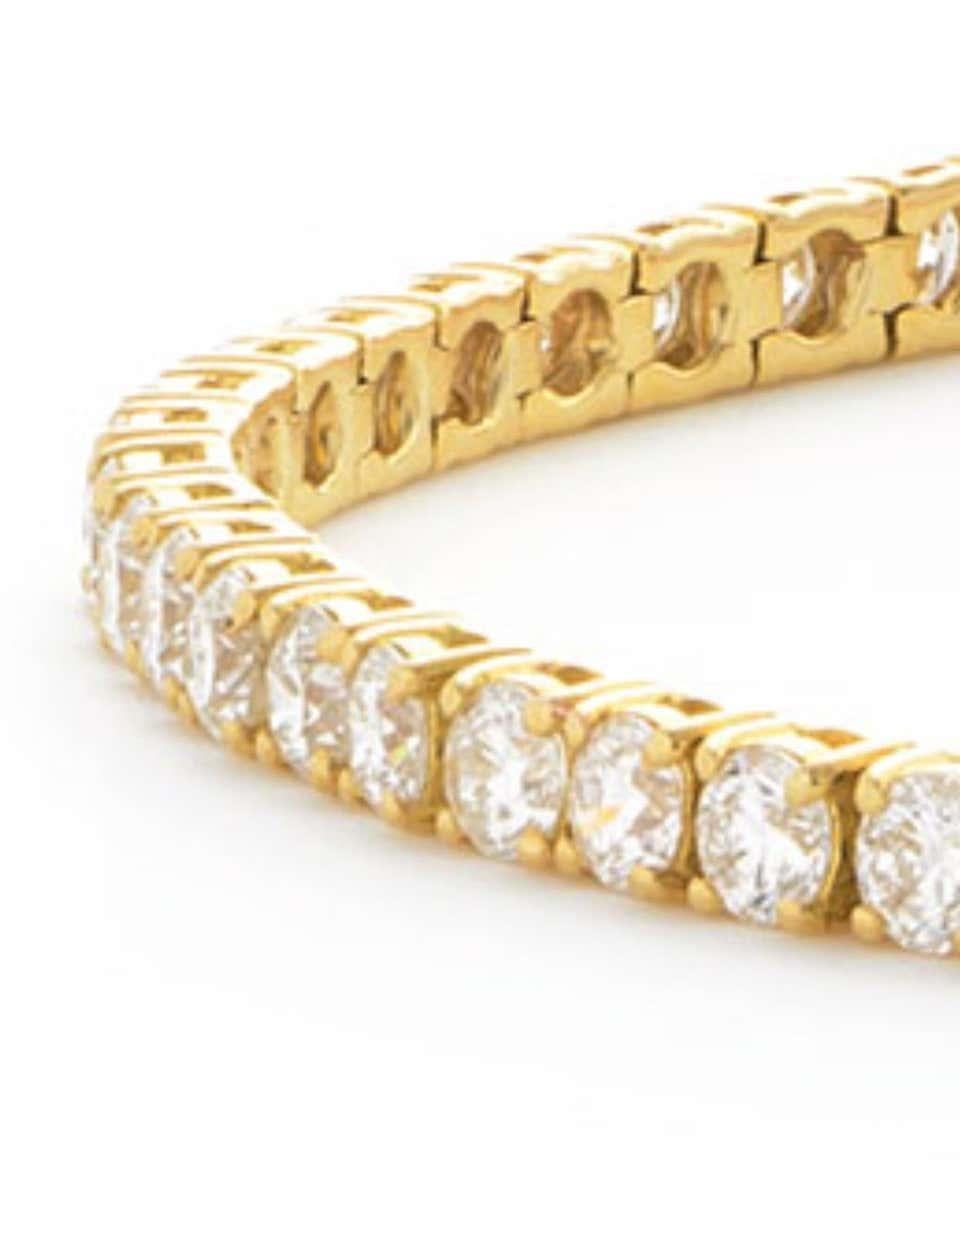 A classic piece that stands the test of time, enjoy the ultimate in luxury and beauty with this gorgeous diamond tennis bracelet, featuring 2.00 Carat of dazzling White Color G Clarity SI1 Round Brilliant Cut diamonds beautifully held in a classic 4